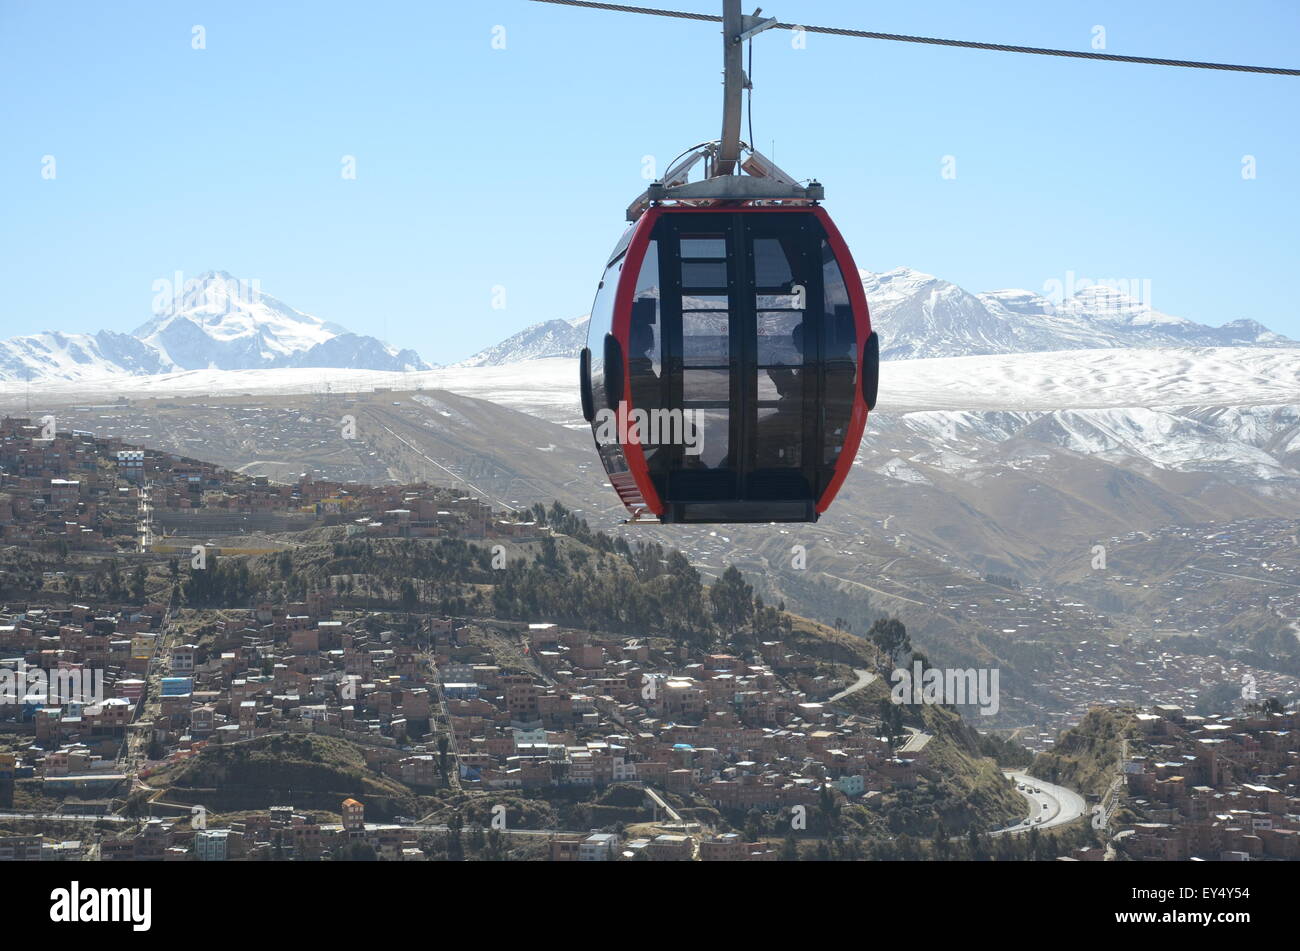 La Paz, Bolivia. 07th July, 2015. Cable car cabins of the red line en route from El Alto to La Paz, Bolivia, 07 July 2015. The Andes mountain range is pictured in the background. Photo: Georg Ismar/dpa/Alamy Live News Stock Photo